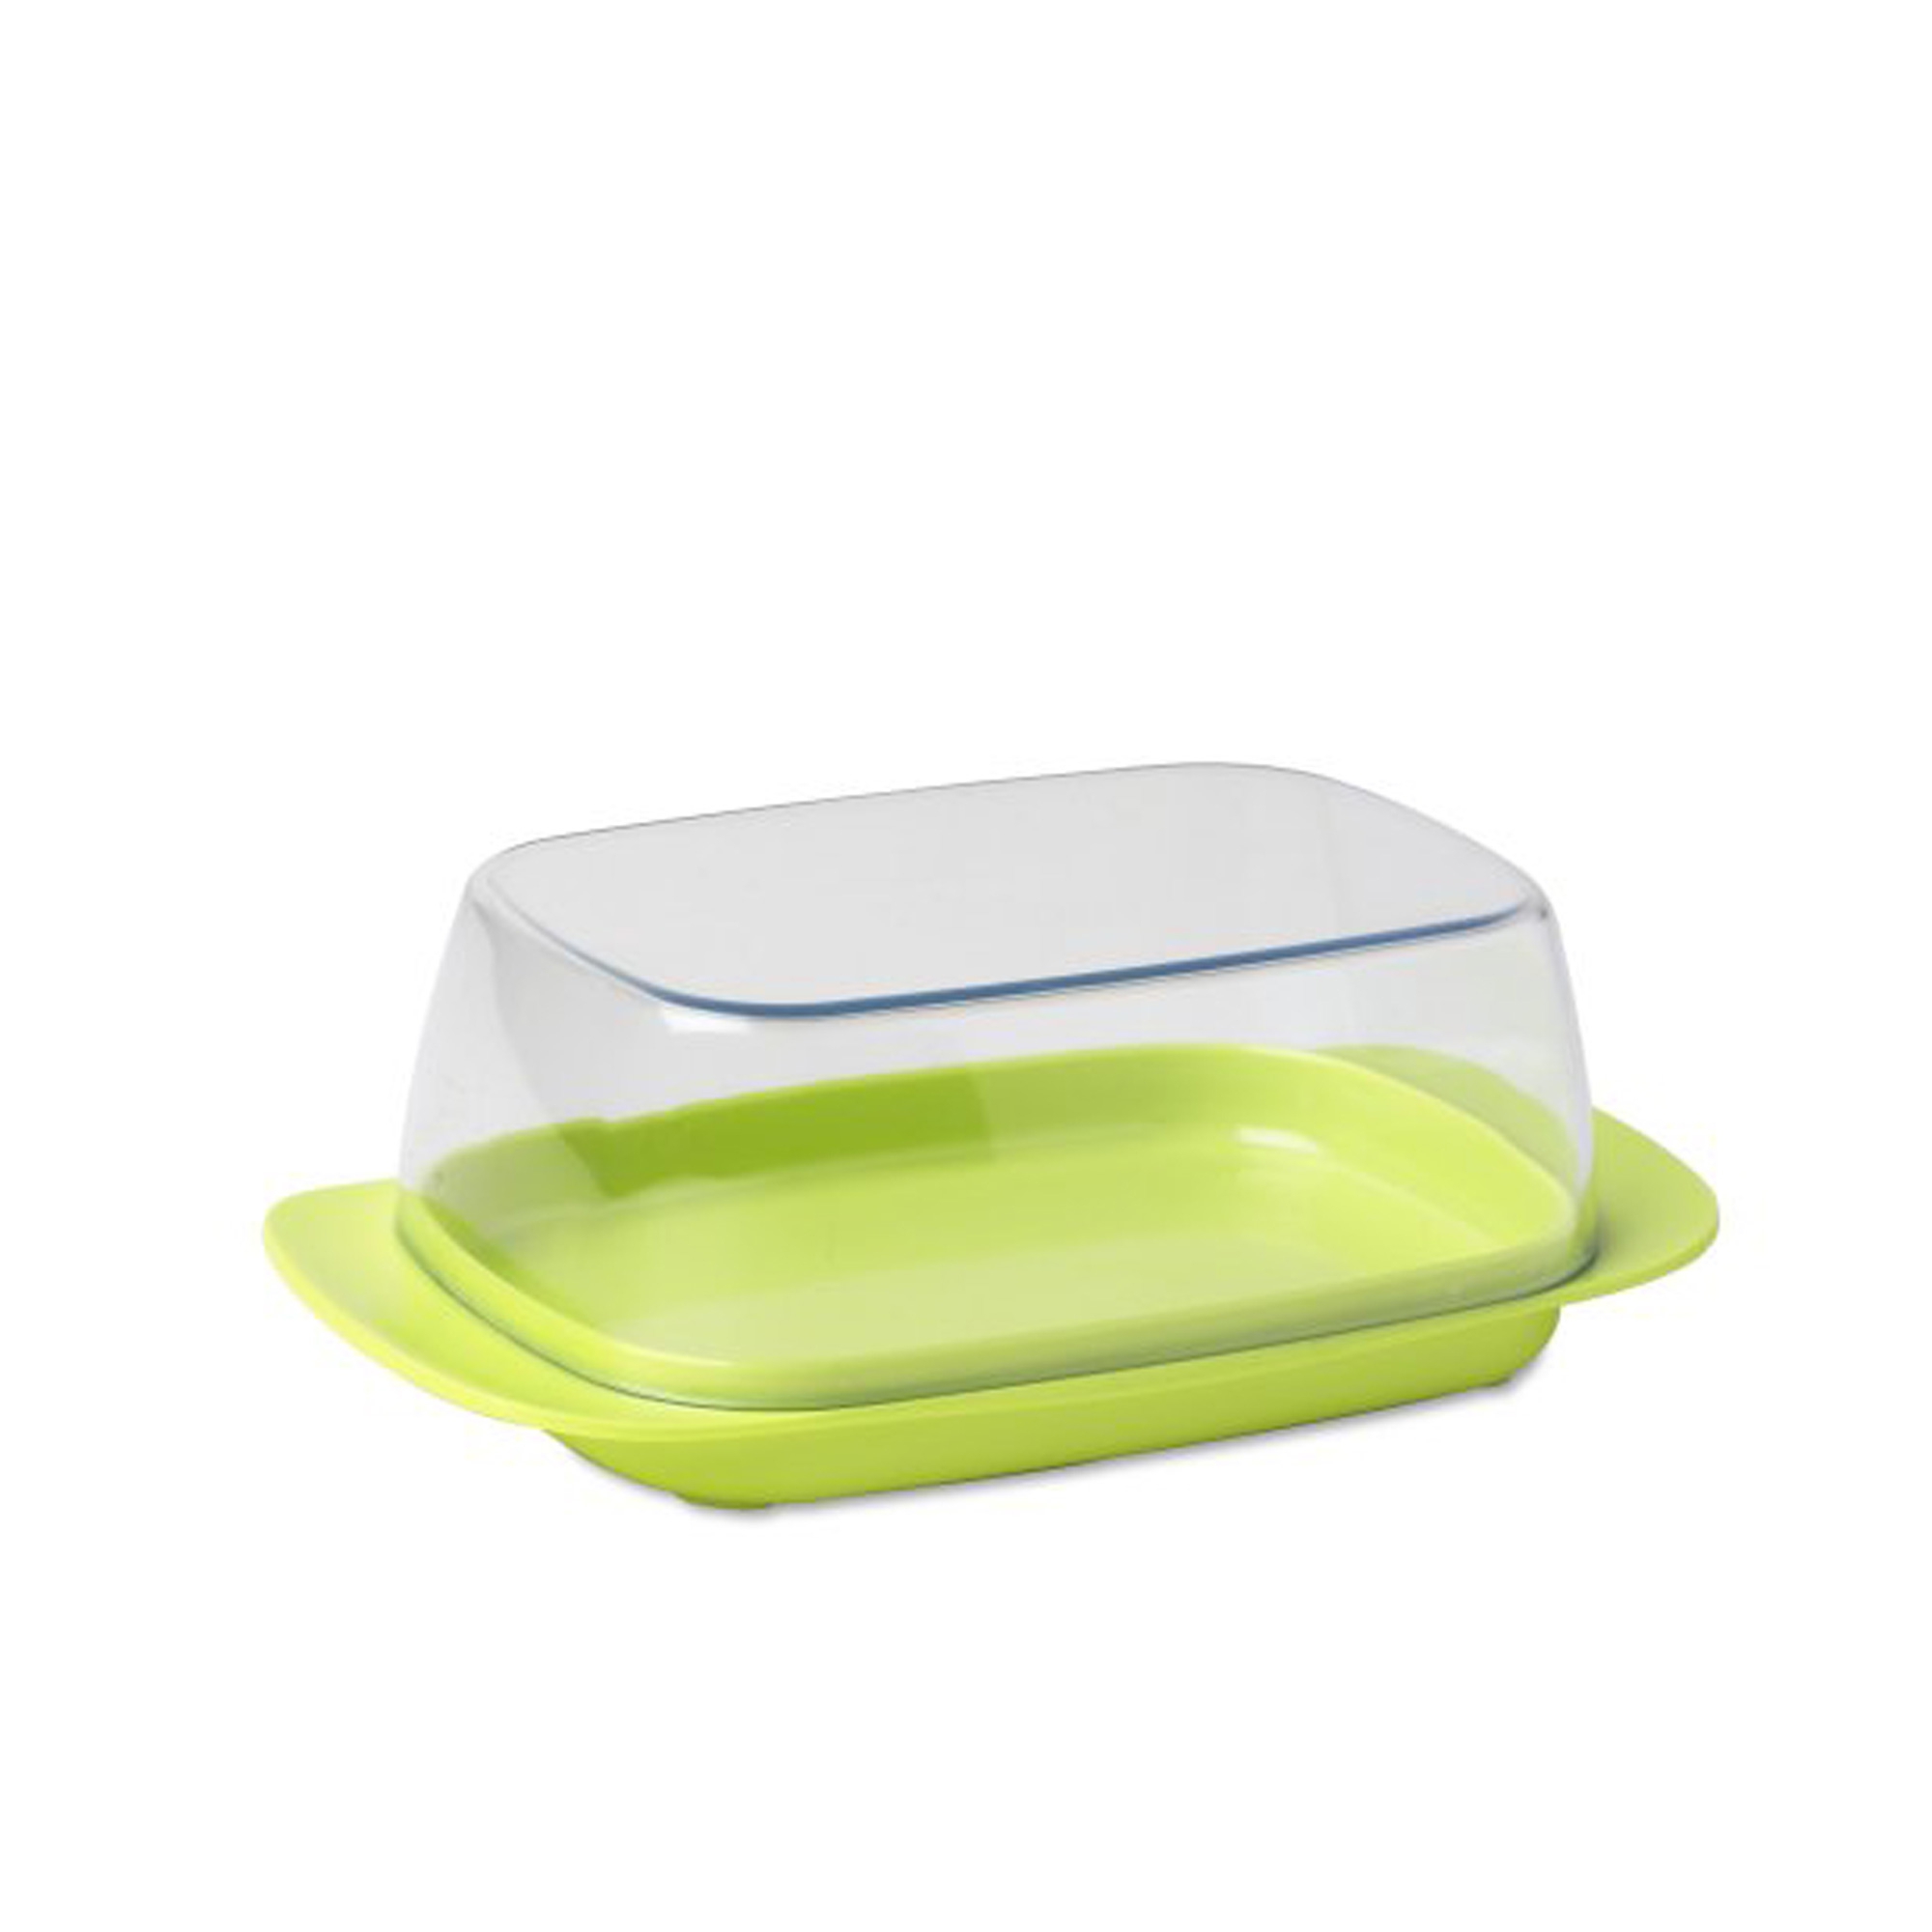 Mepal - lower part butter dish 250g - different colors